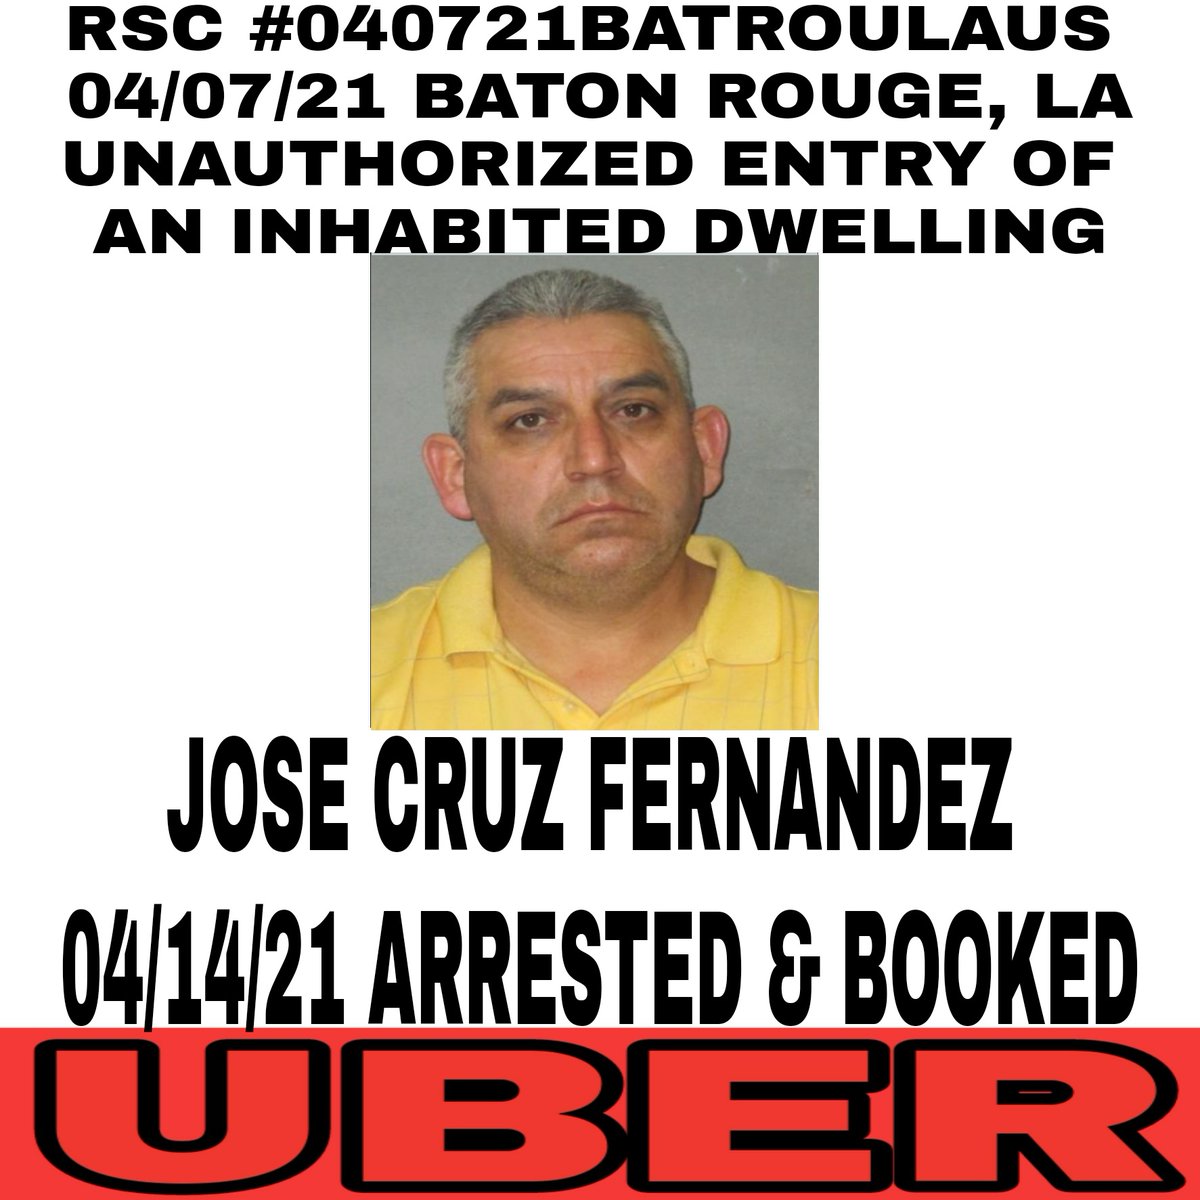 RSC #040721BATROULAUS 
04/07/21 BATON ROUGE, LA
UNAUTHORIZED ENTRY OF 
AN INHABITED DWELLING

UBER <CONFIRMED 
DRIVER: Jose Cruz Fernandez
47 / St. Gabriel

According to the report, Fernandez left when he saw the victim's roommate was also home.
https://t.co/hhu9WhbrEK https://t.co/2krAOBYNpV